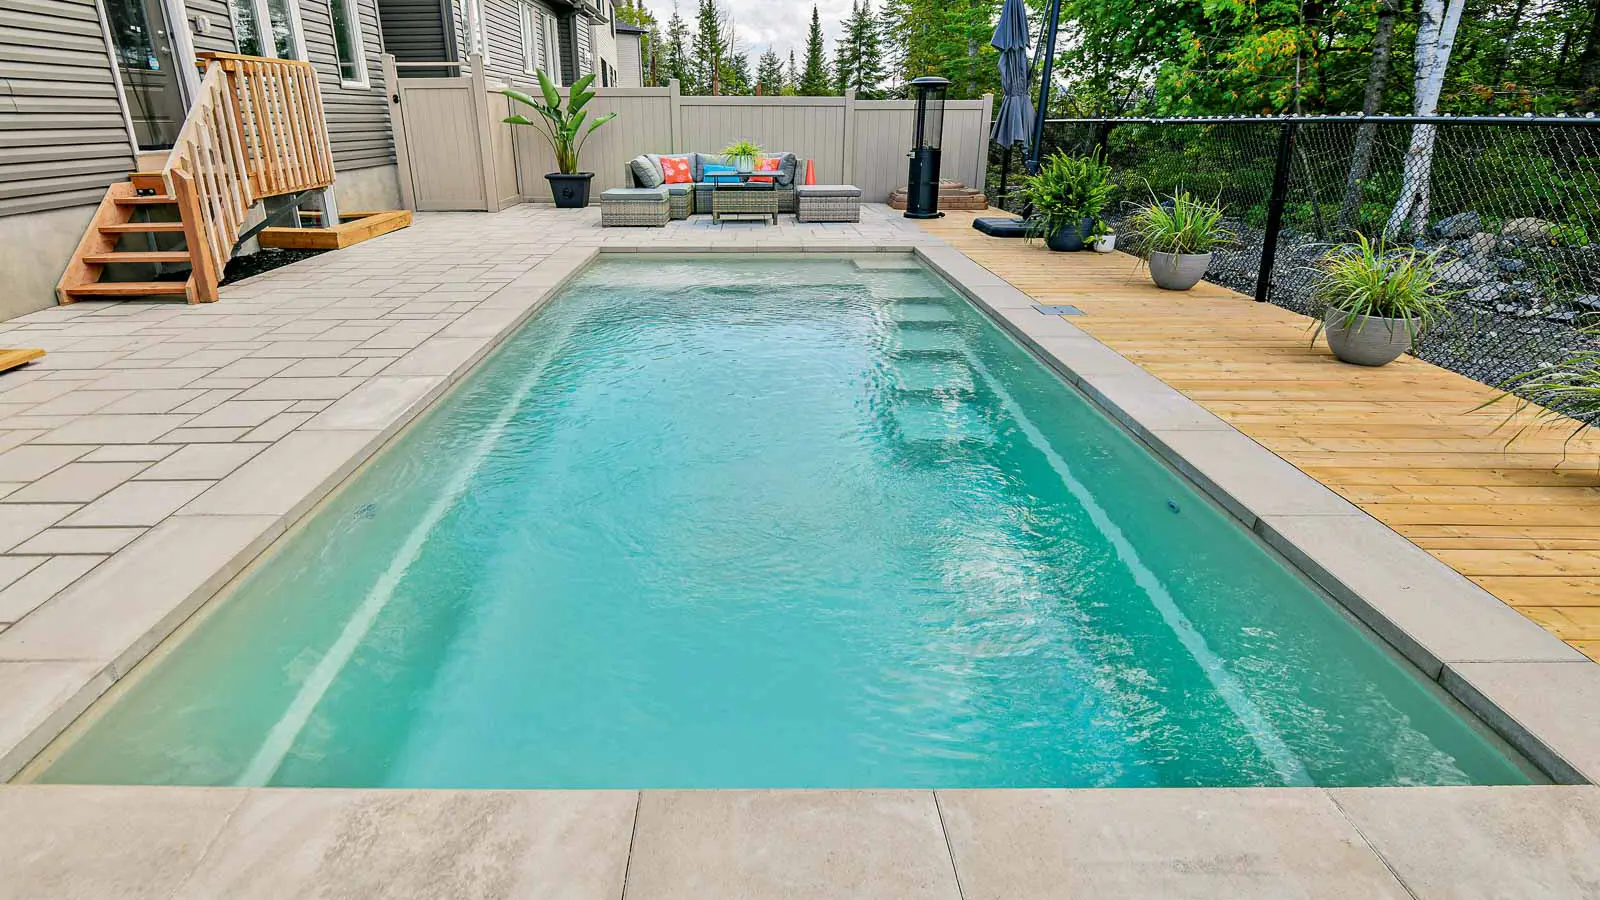 The Precision, a fiberglass pool with a high water line